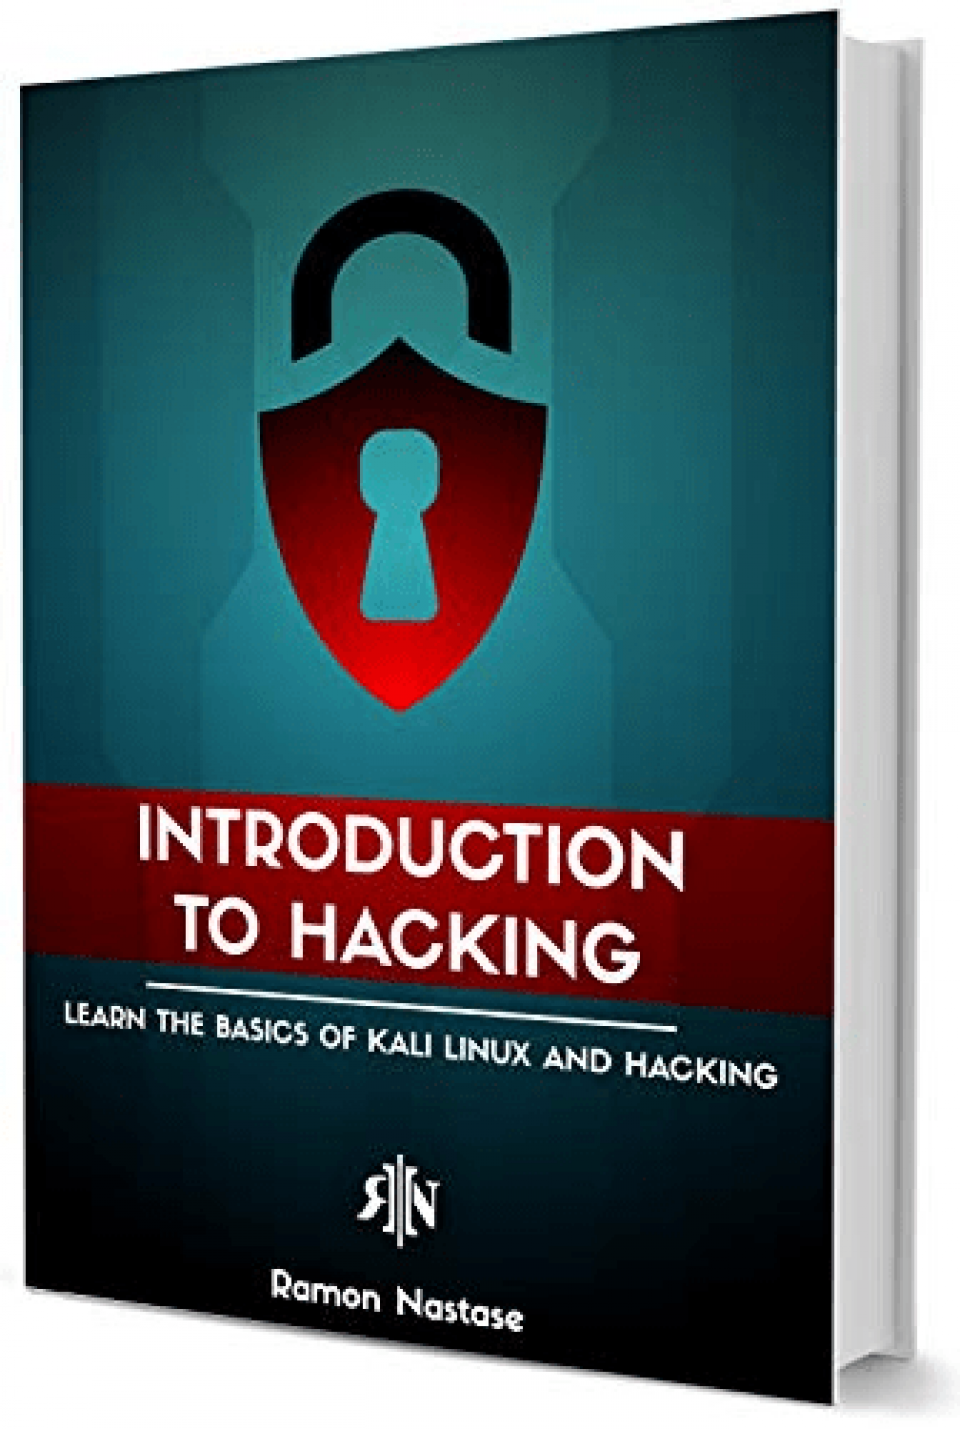 Image of the Hacking Guide Book